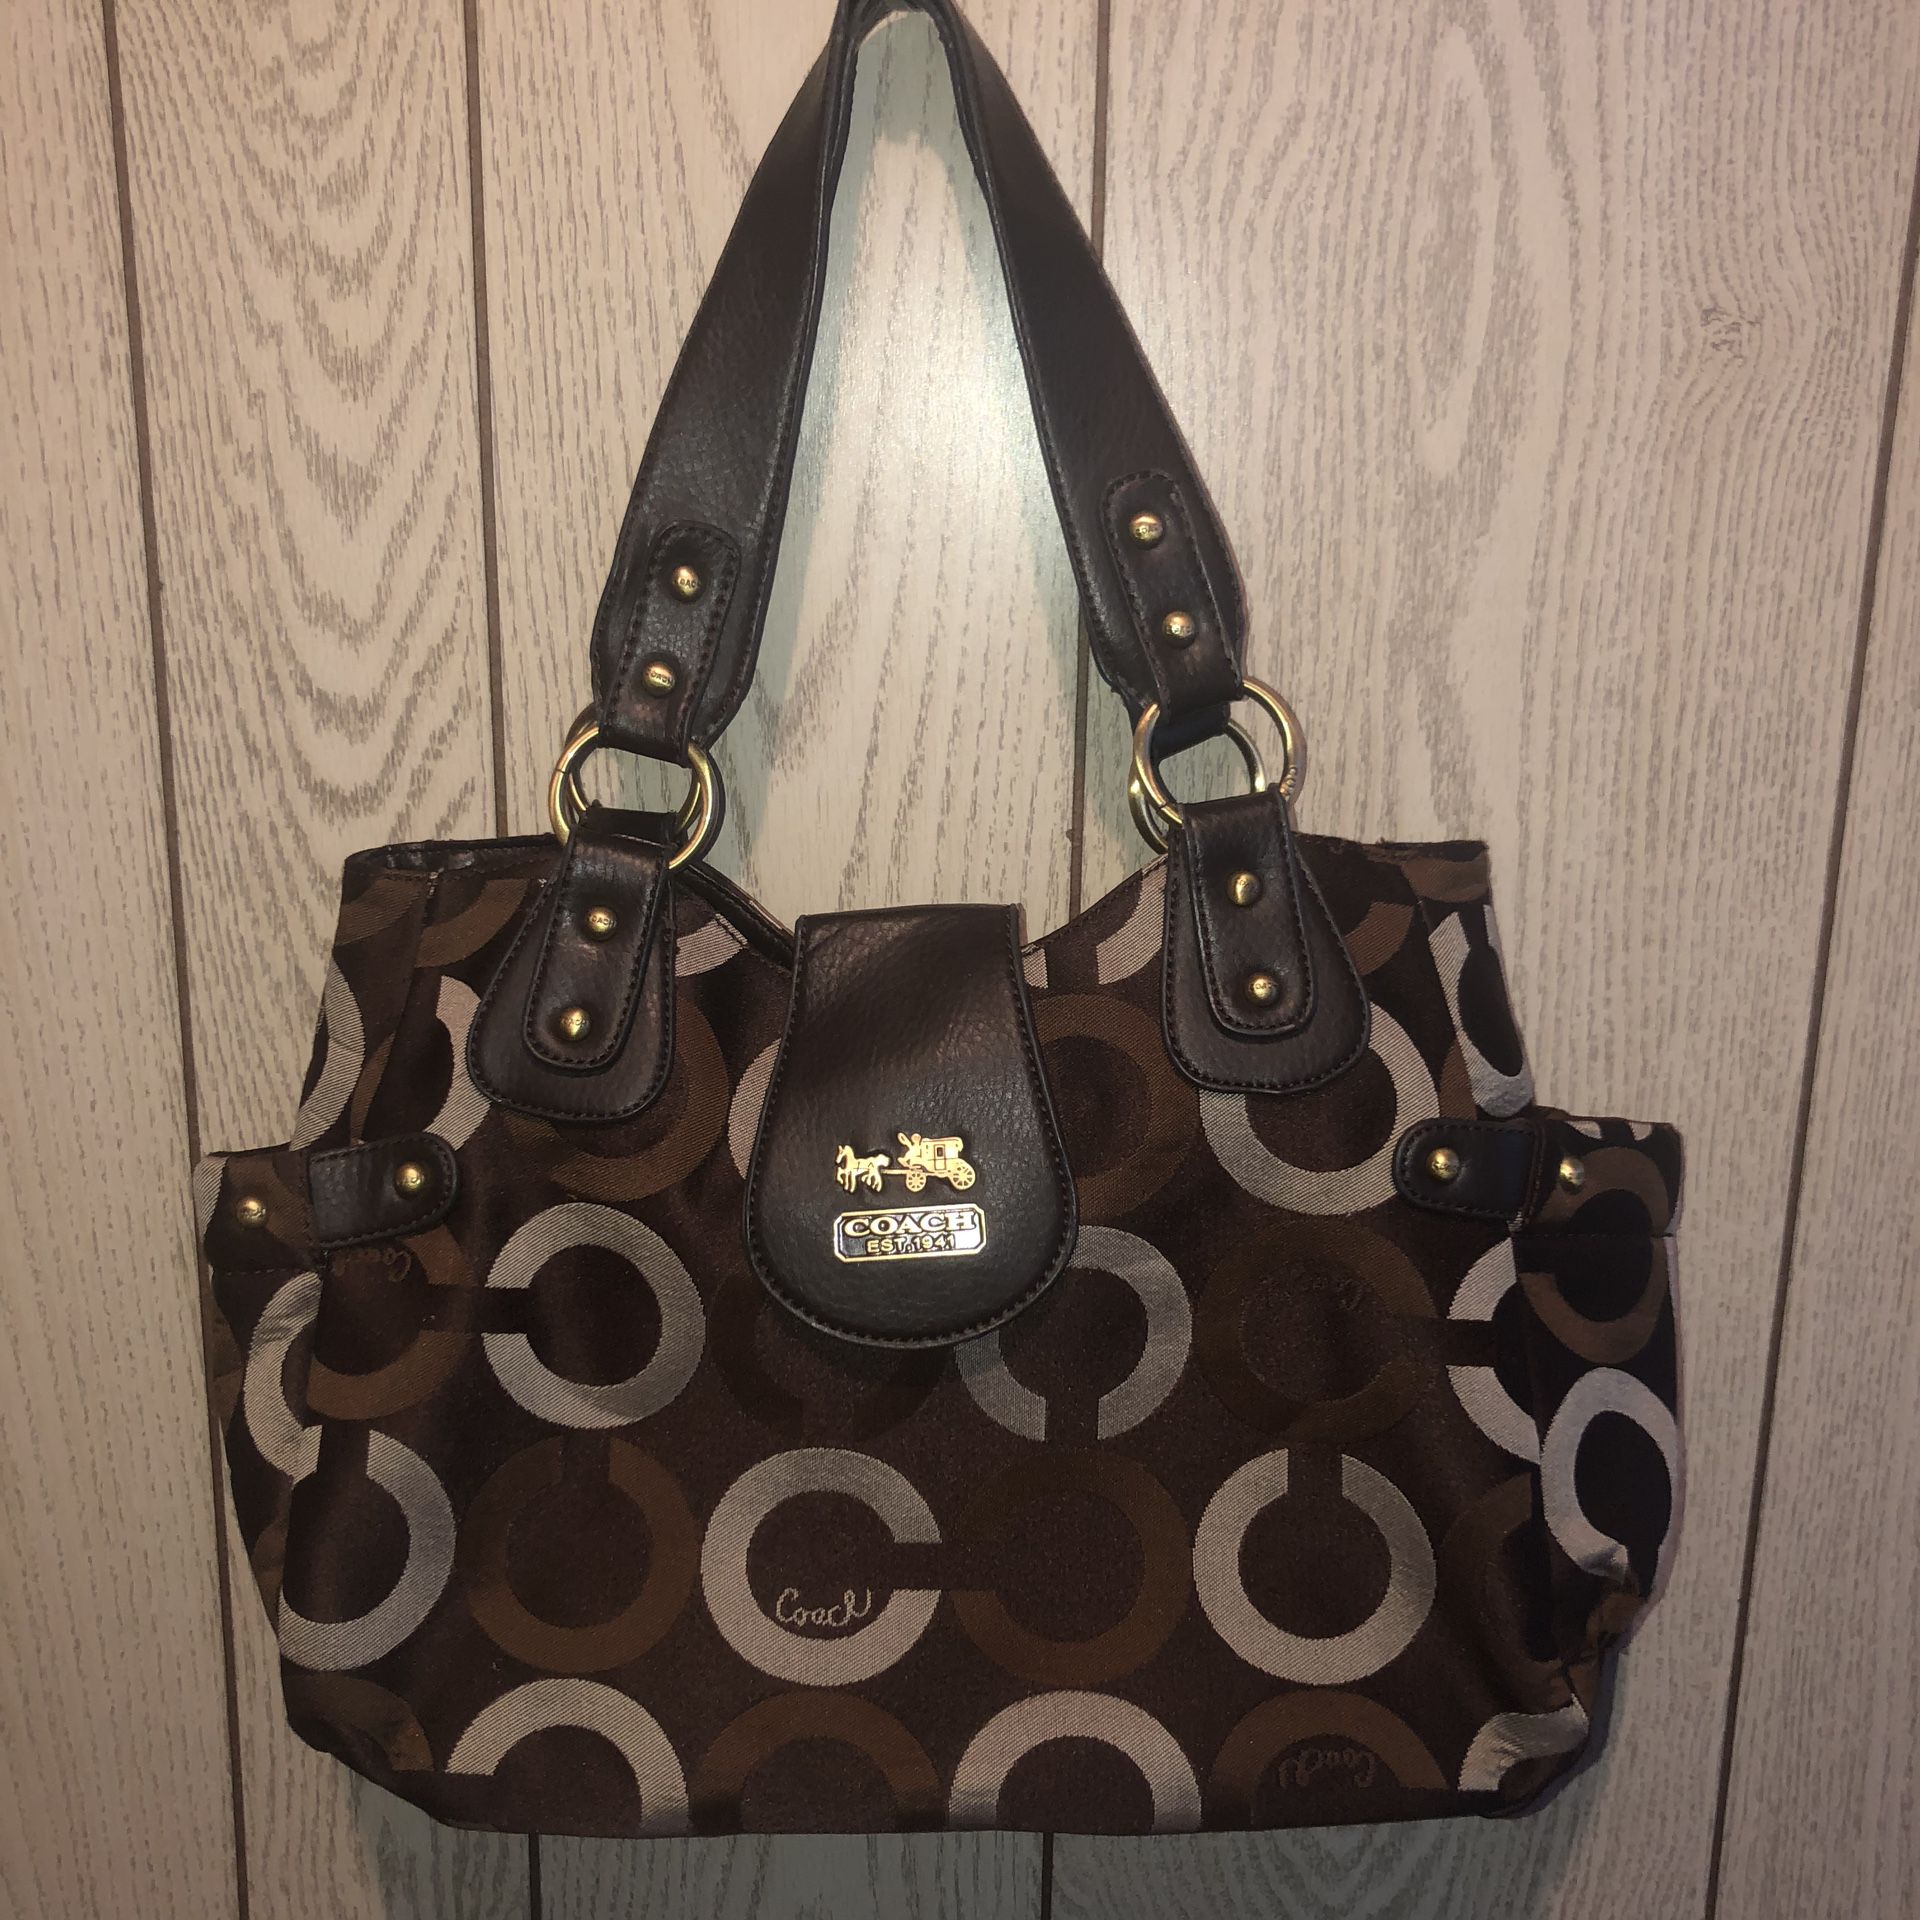 Large and beautiful brown and tan purse in near brand new condition except for a very small tear in the lining at the top inside. See all pics for de